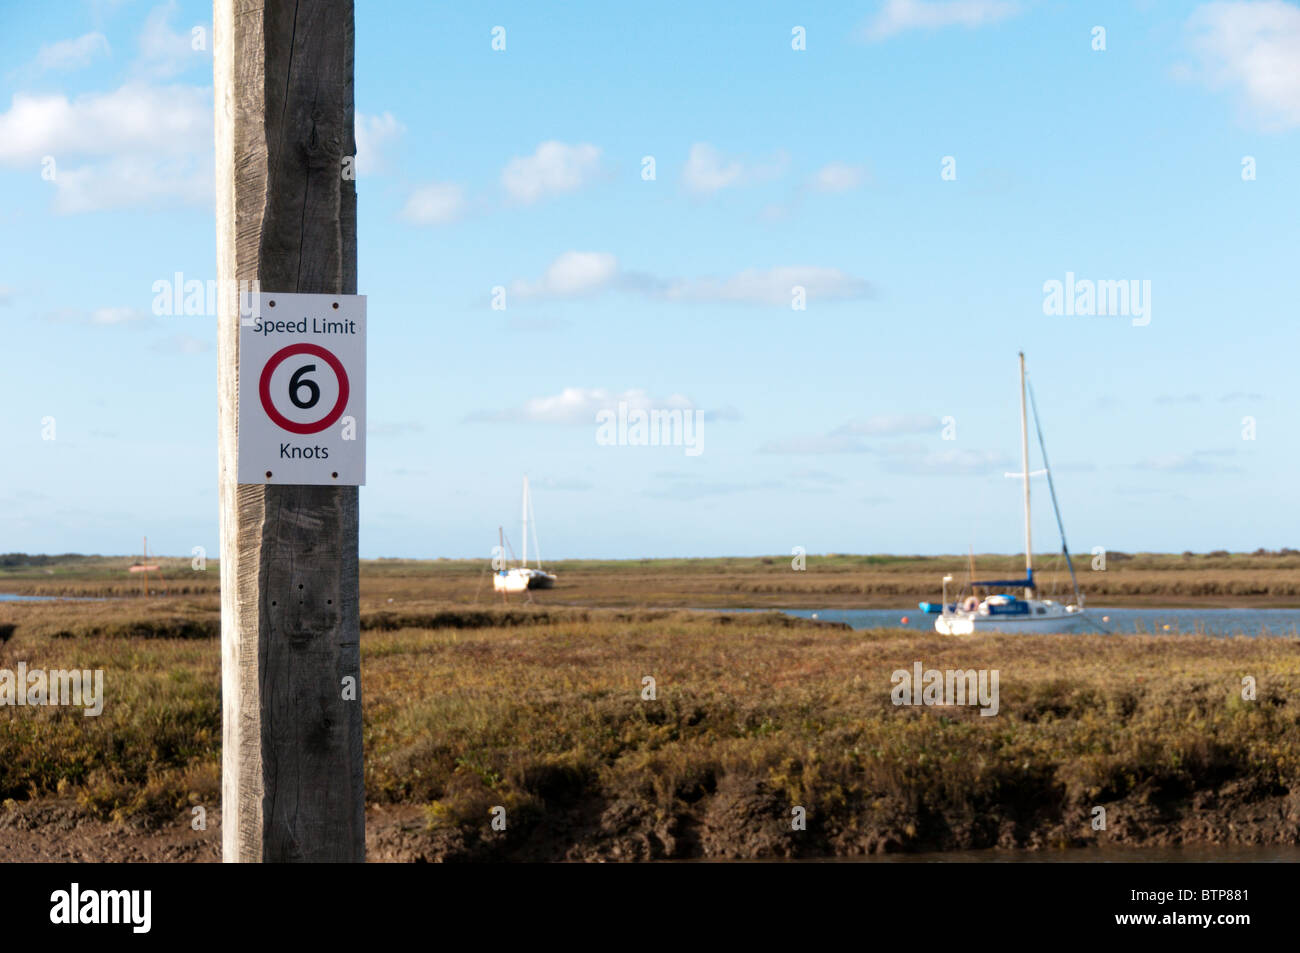 A speed limit sign of 6 knots on a mooring post at Brancaster Staithe, Norfolk, England Stock Photo